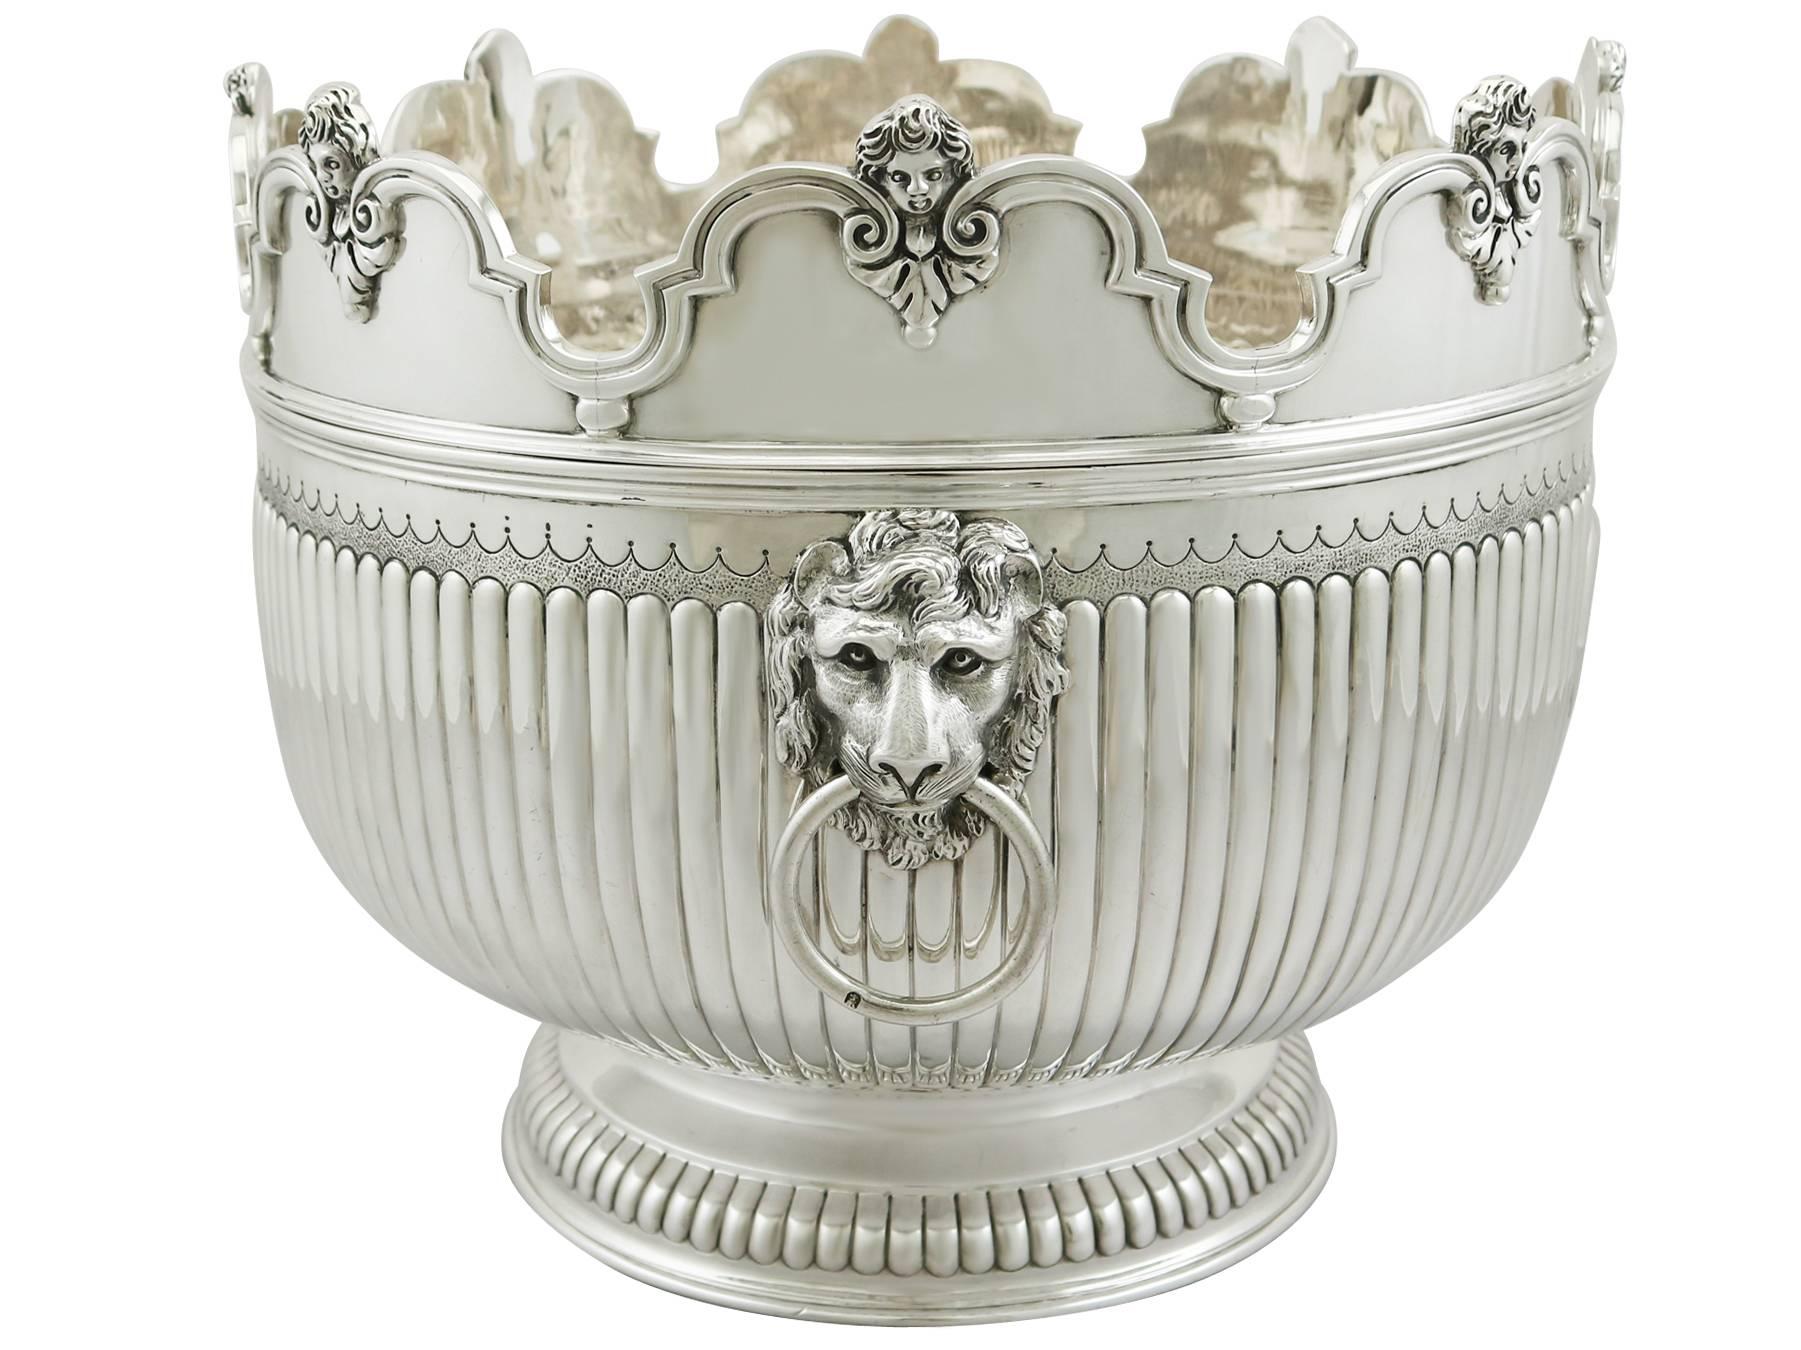 A magnificent, fine and impressive antique Victorian English Britannia silver Monteith bowl; an addition to our range of collectable silverware.

This magnificent antique Victorian Britannia standard silver bowl has a large Monteith form onto a